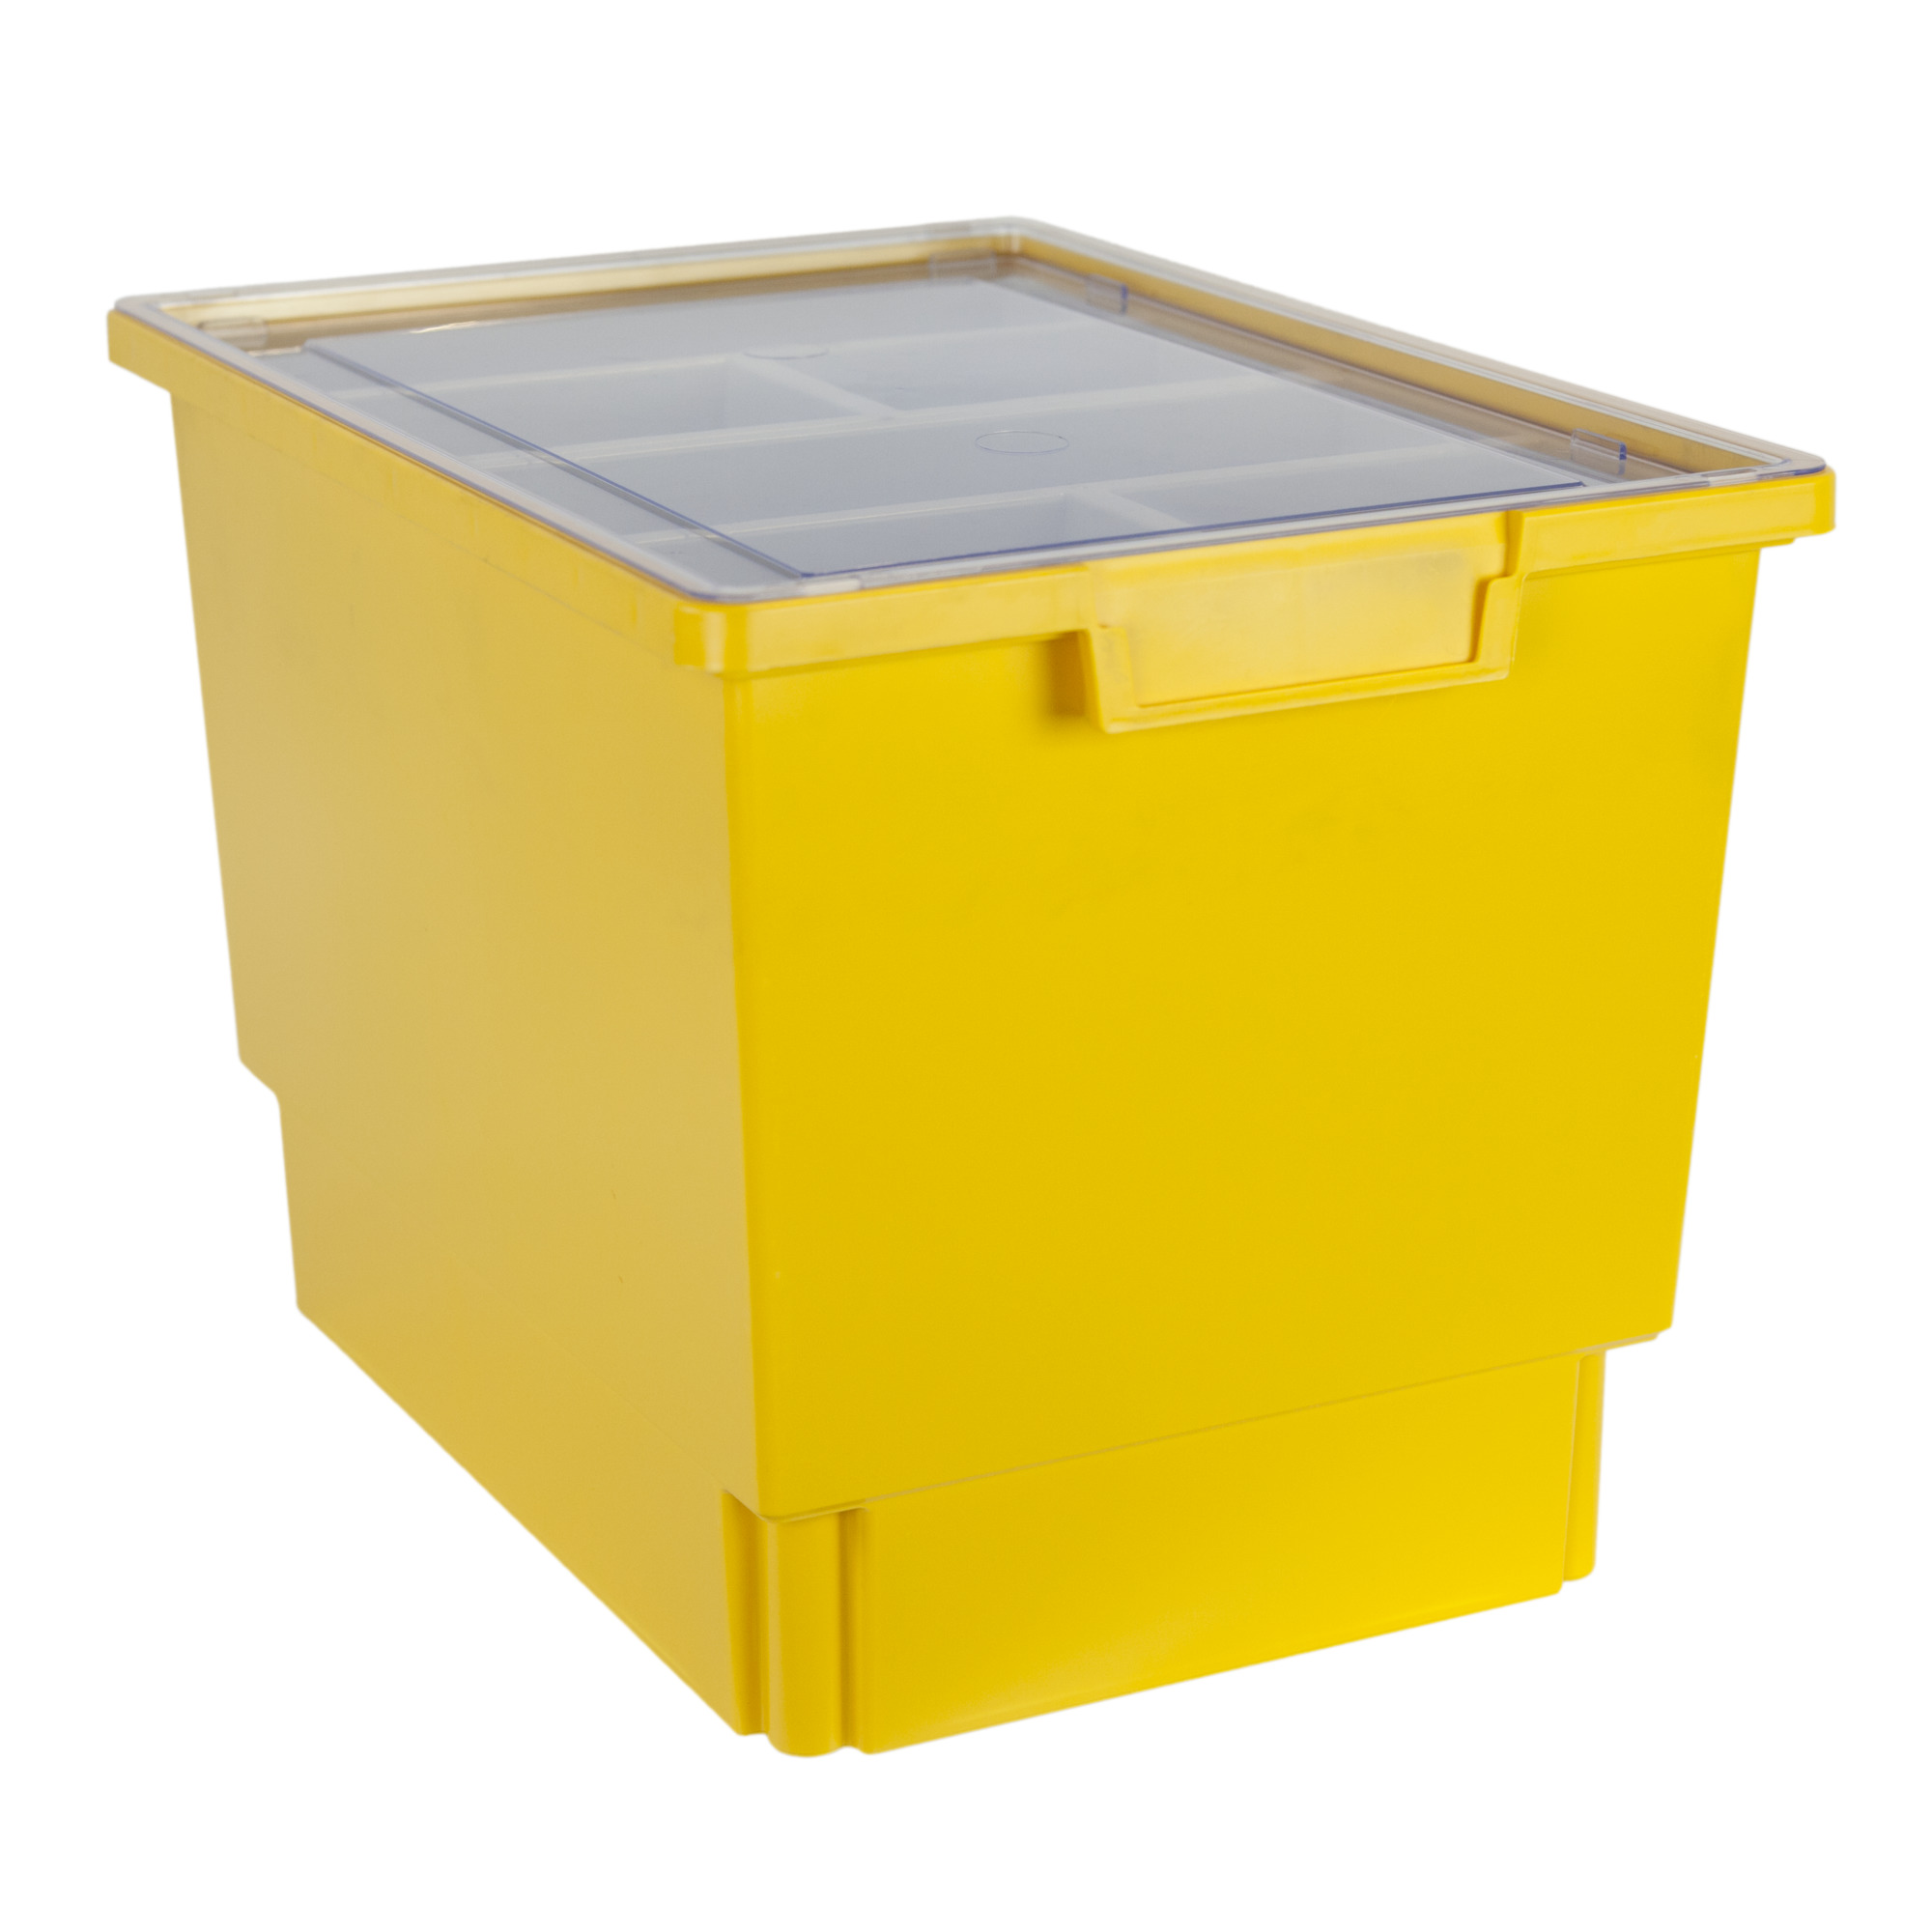 Certwood StorWerks, Slim Line 12Inch Tray Kit (3 x Divisions) Yellow, Included (qty.) 1, Material Plastic, Height 12 in, Model CE1954PY-NK0202-1